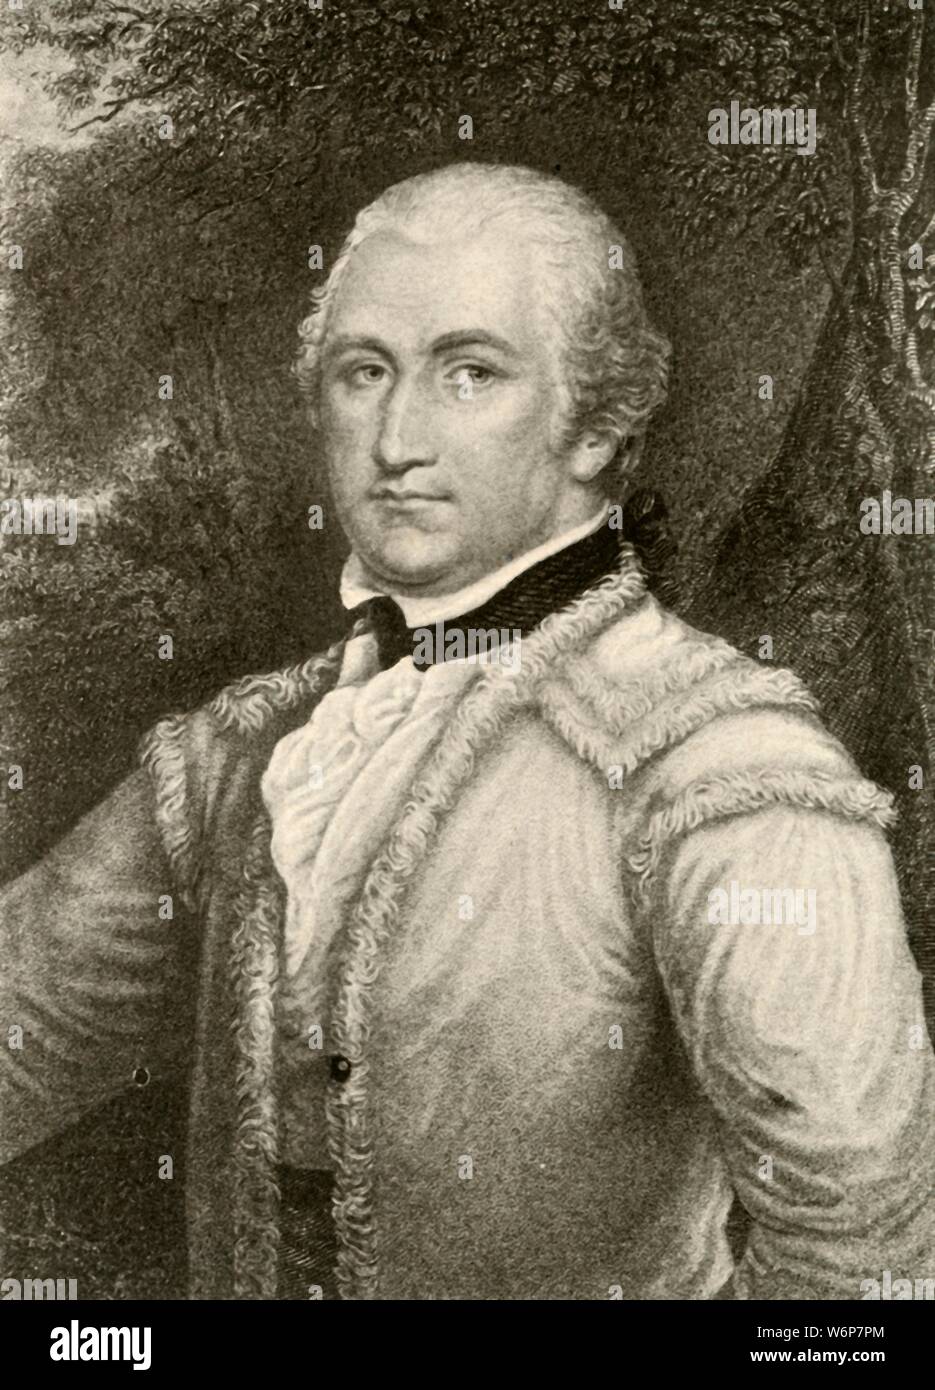 'General Daniel Morgan in a buckskin coat of the Virginia rangers', c1780, (1937). Daniel Morgan (1736-1802)  American pioneer, soldier, and politician from Virginia. Tactician of the American Revolutionary War, associated with the Whiskey Rebellion. From &quot;History of American Costume - Book One 1607-1800&quot;, by Elisabeth McClellan. [Tudor Publishing Company, New York, 1937] Stock Photo